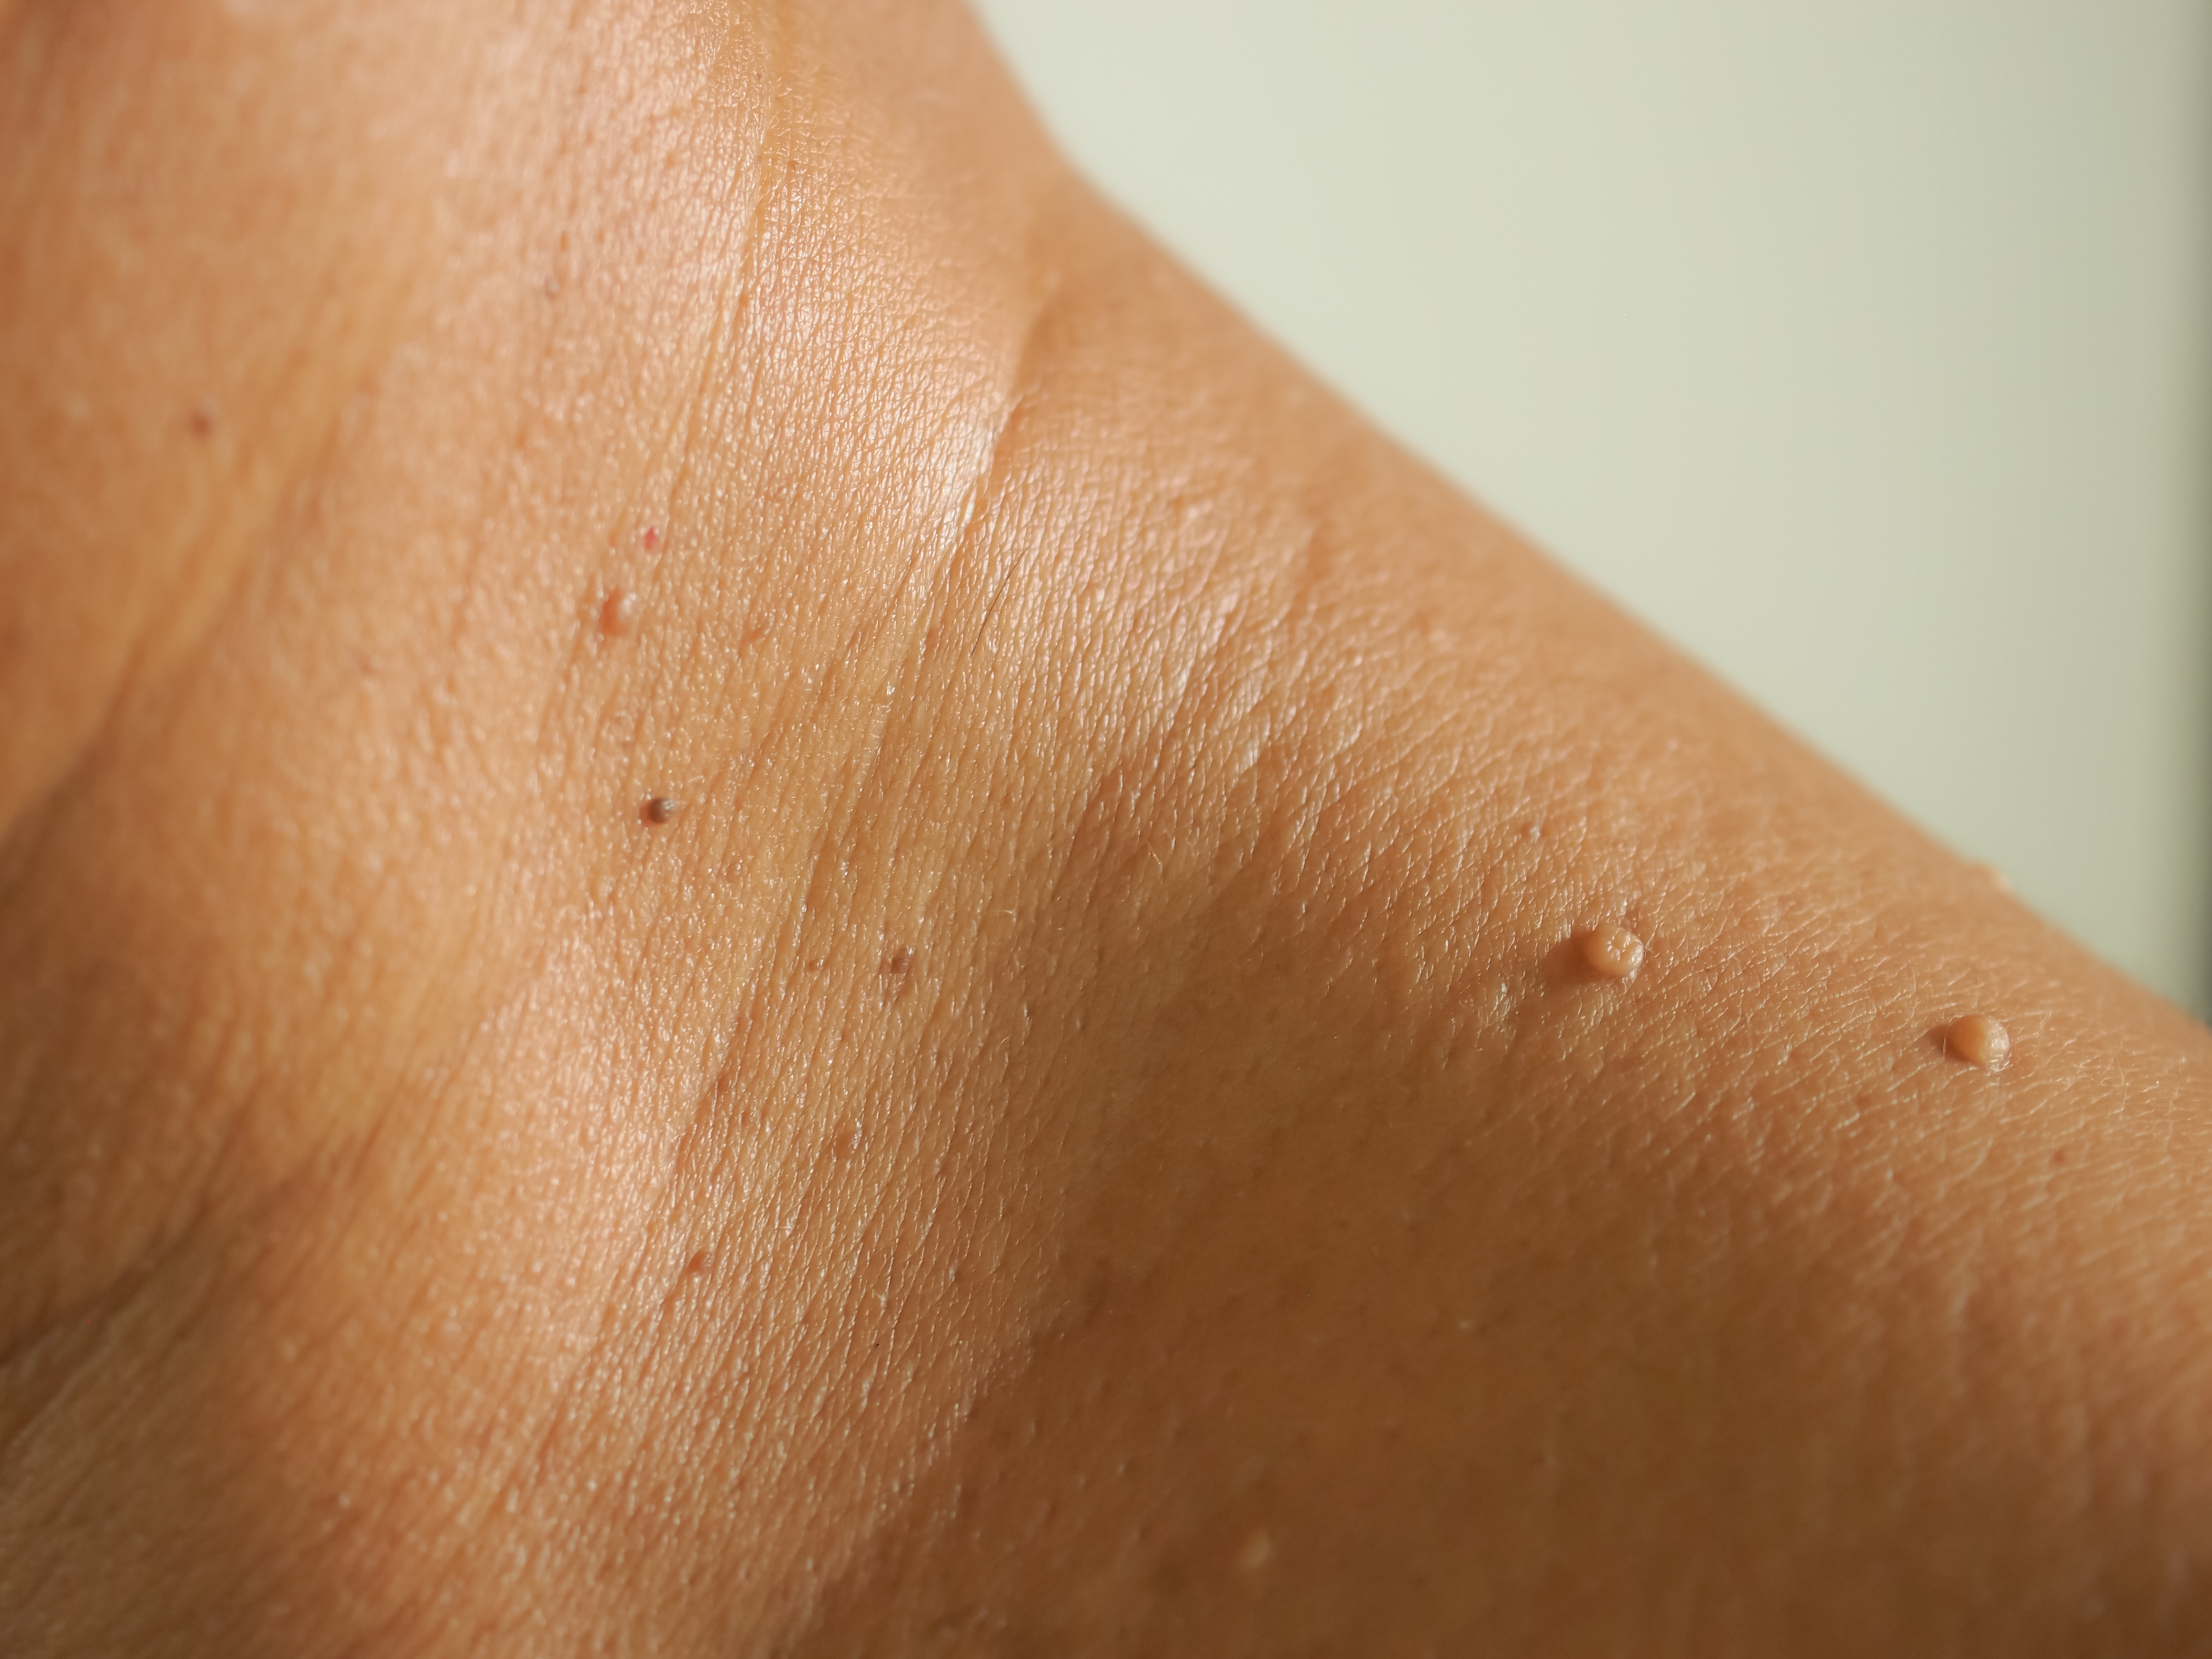 Skin Tags: What Is The Skin Tag Removal Healing Time & Will They Come Back?